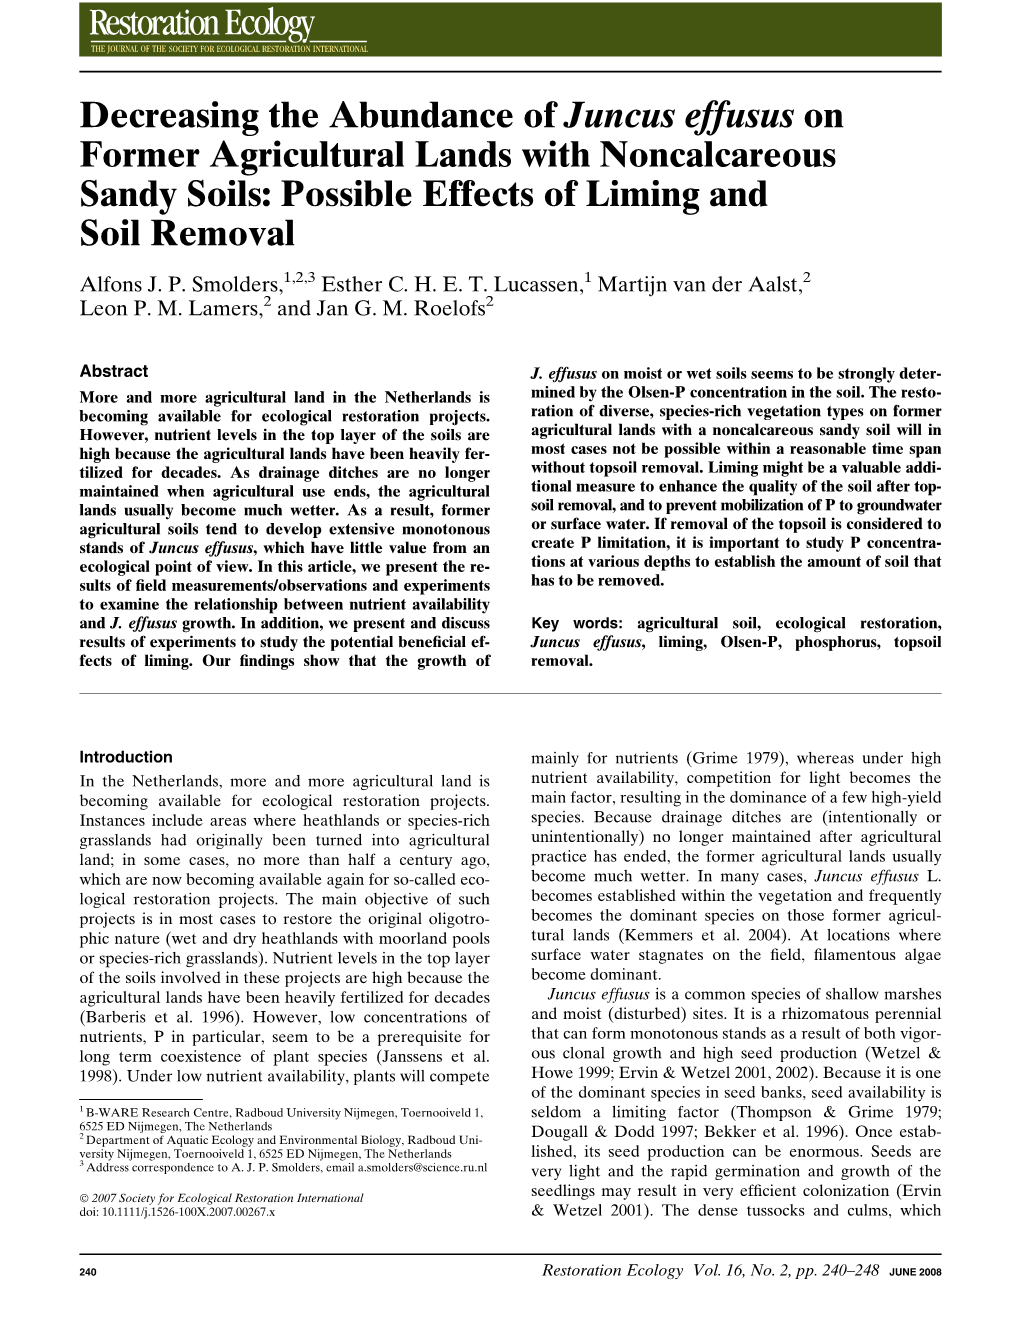 Decreasing the Abundance of Juncus Effusus on Former Agricultural Lands with Noncalcareous Sandy Soils: Possible Effects of Liming and Soil Removal Alfons J